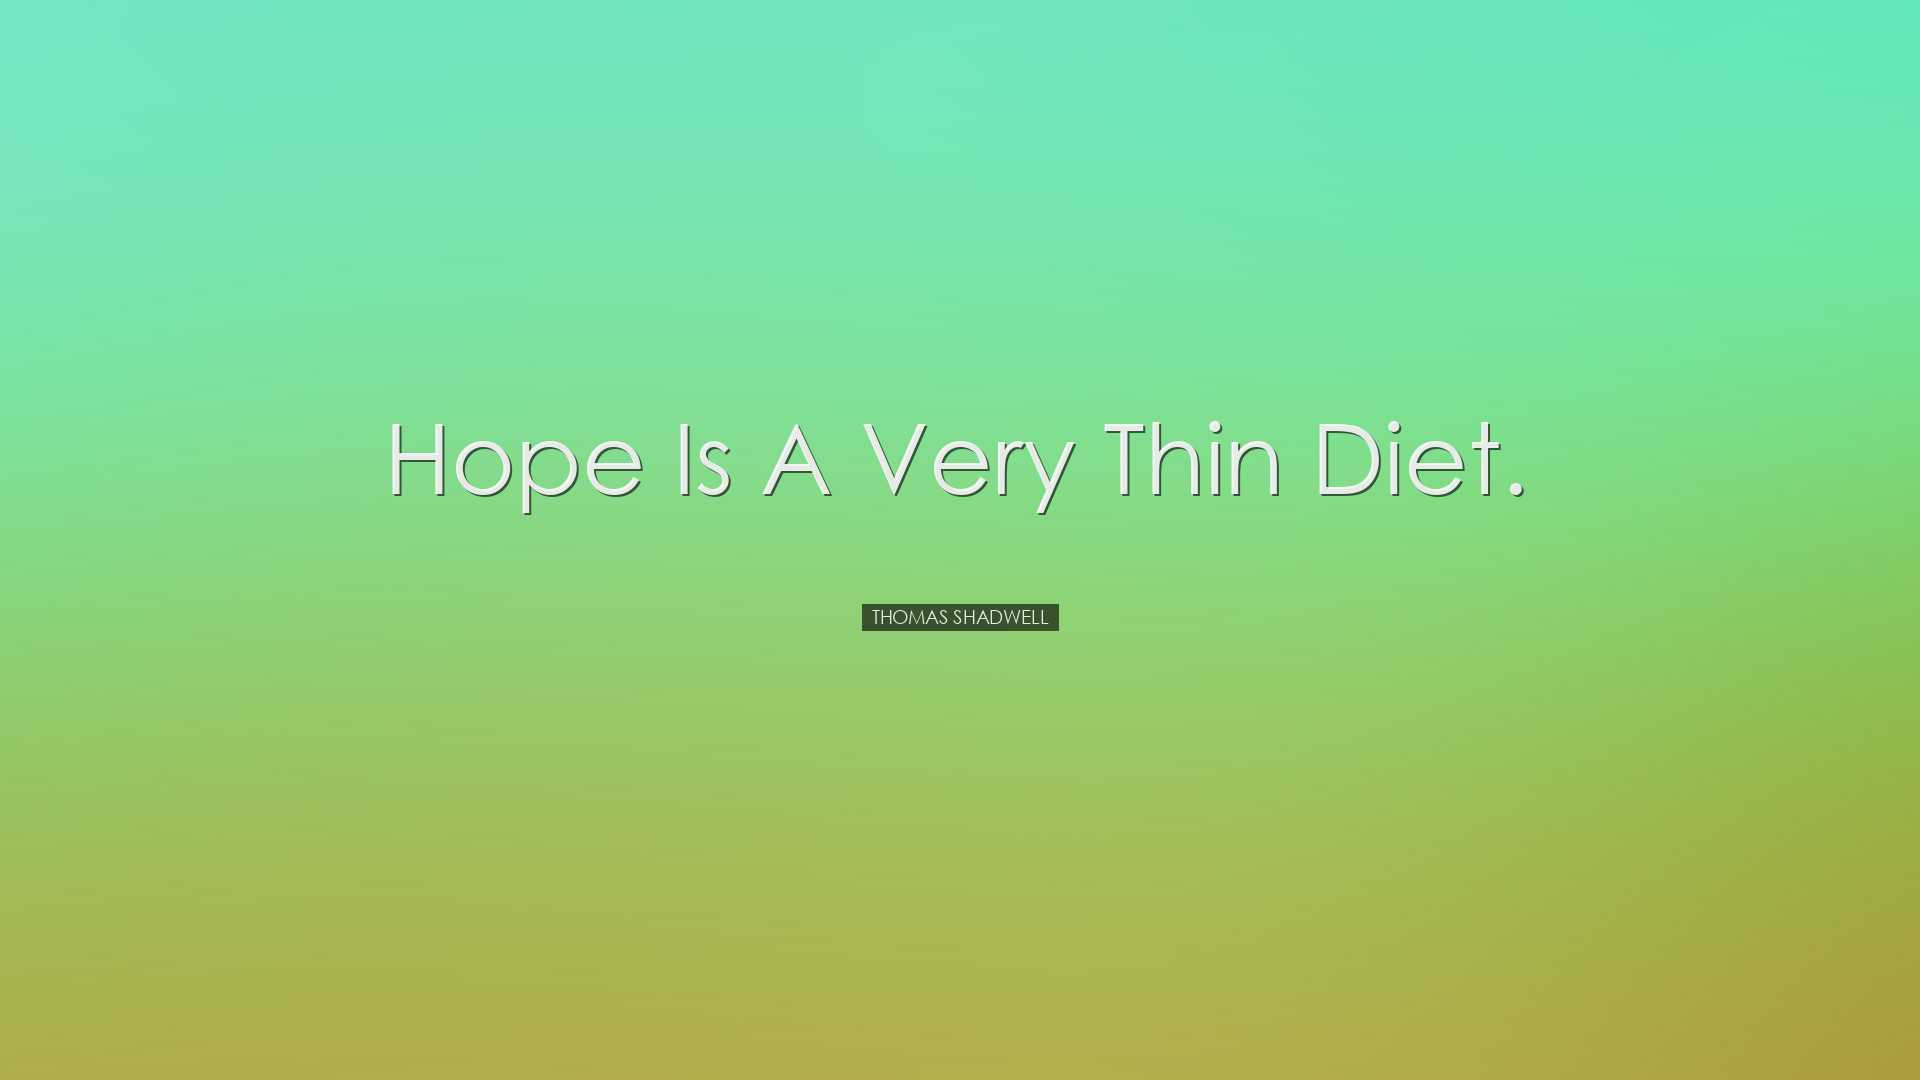 Hope is a very thin diet. - Thomas Shadwell